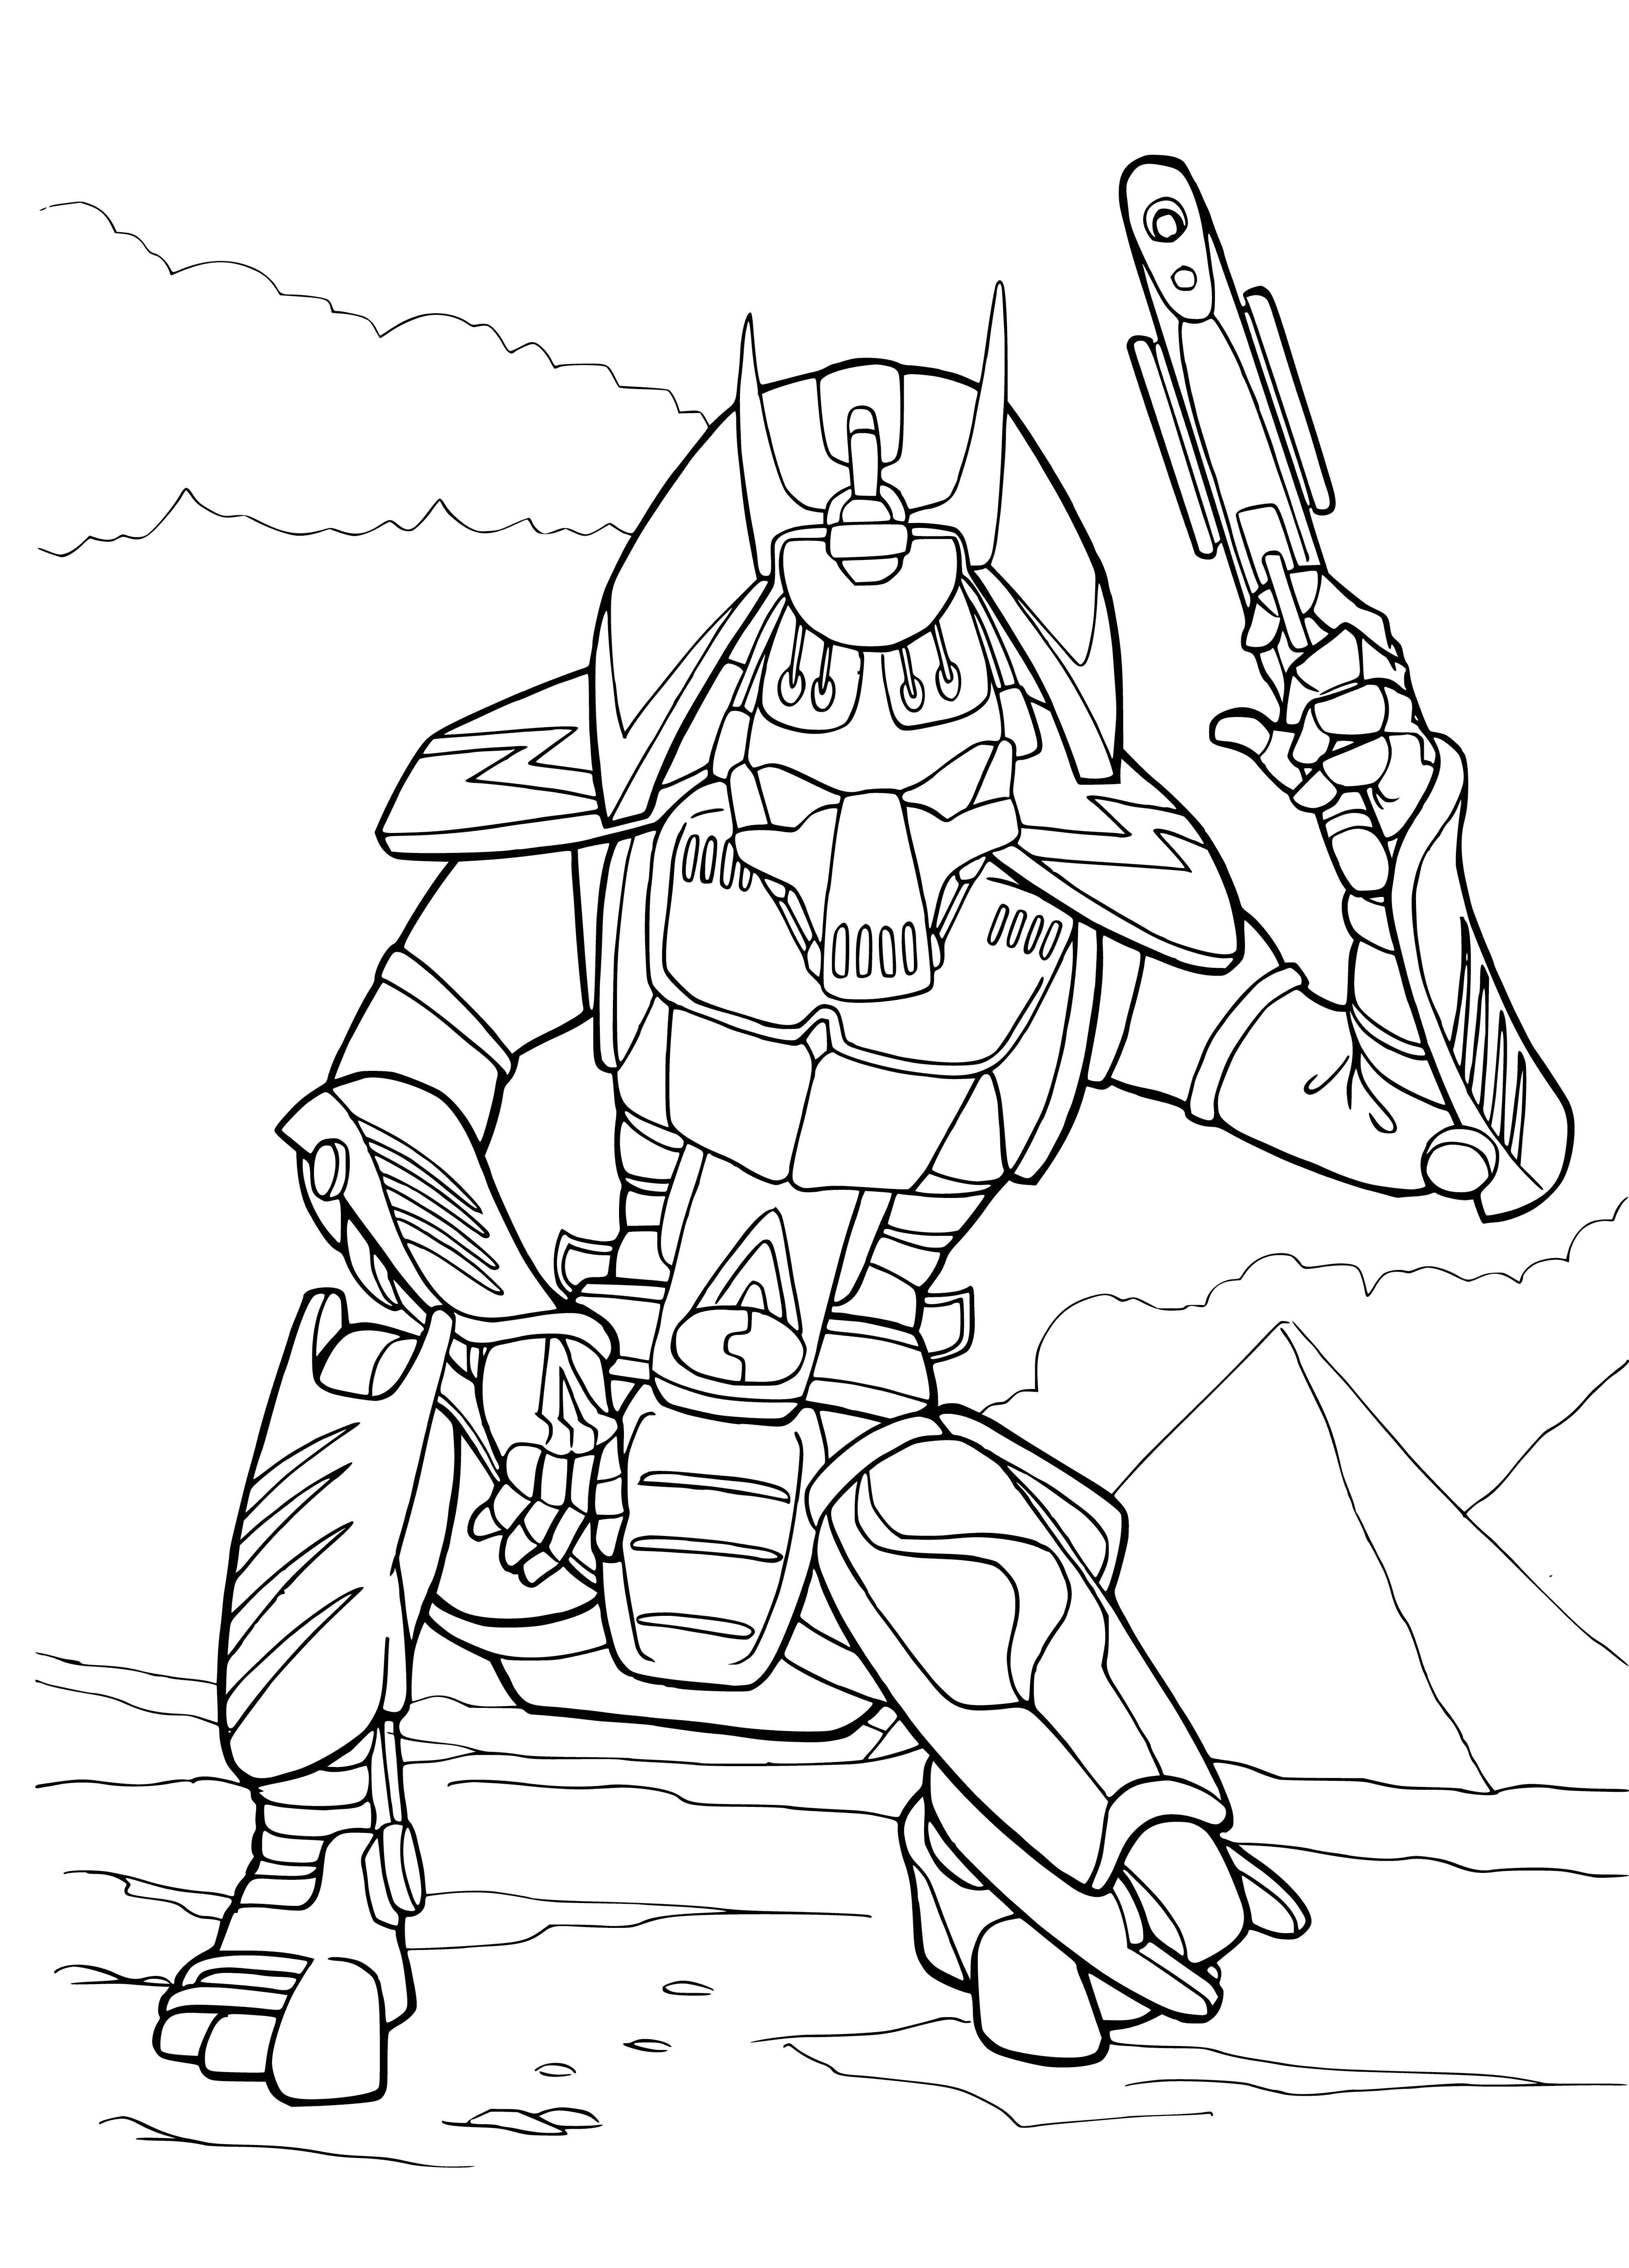 Guardian of the pyramids coloring page